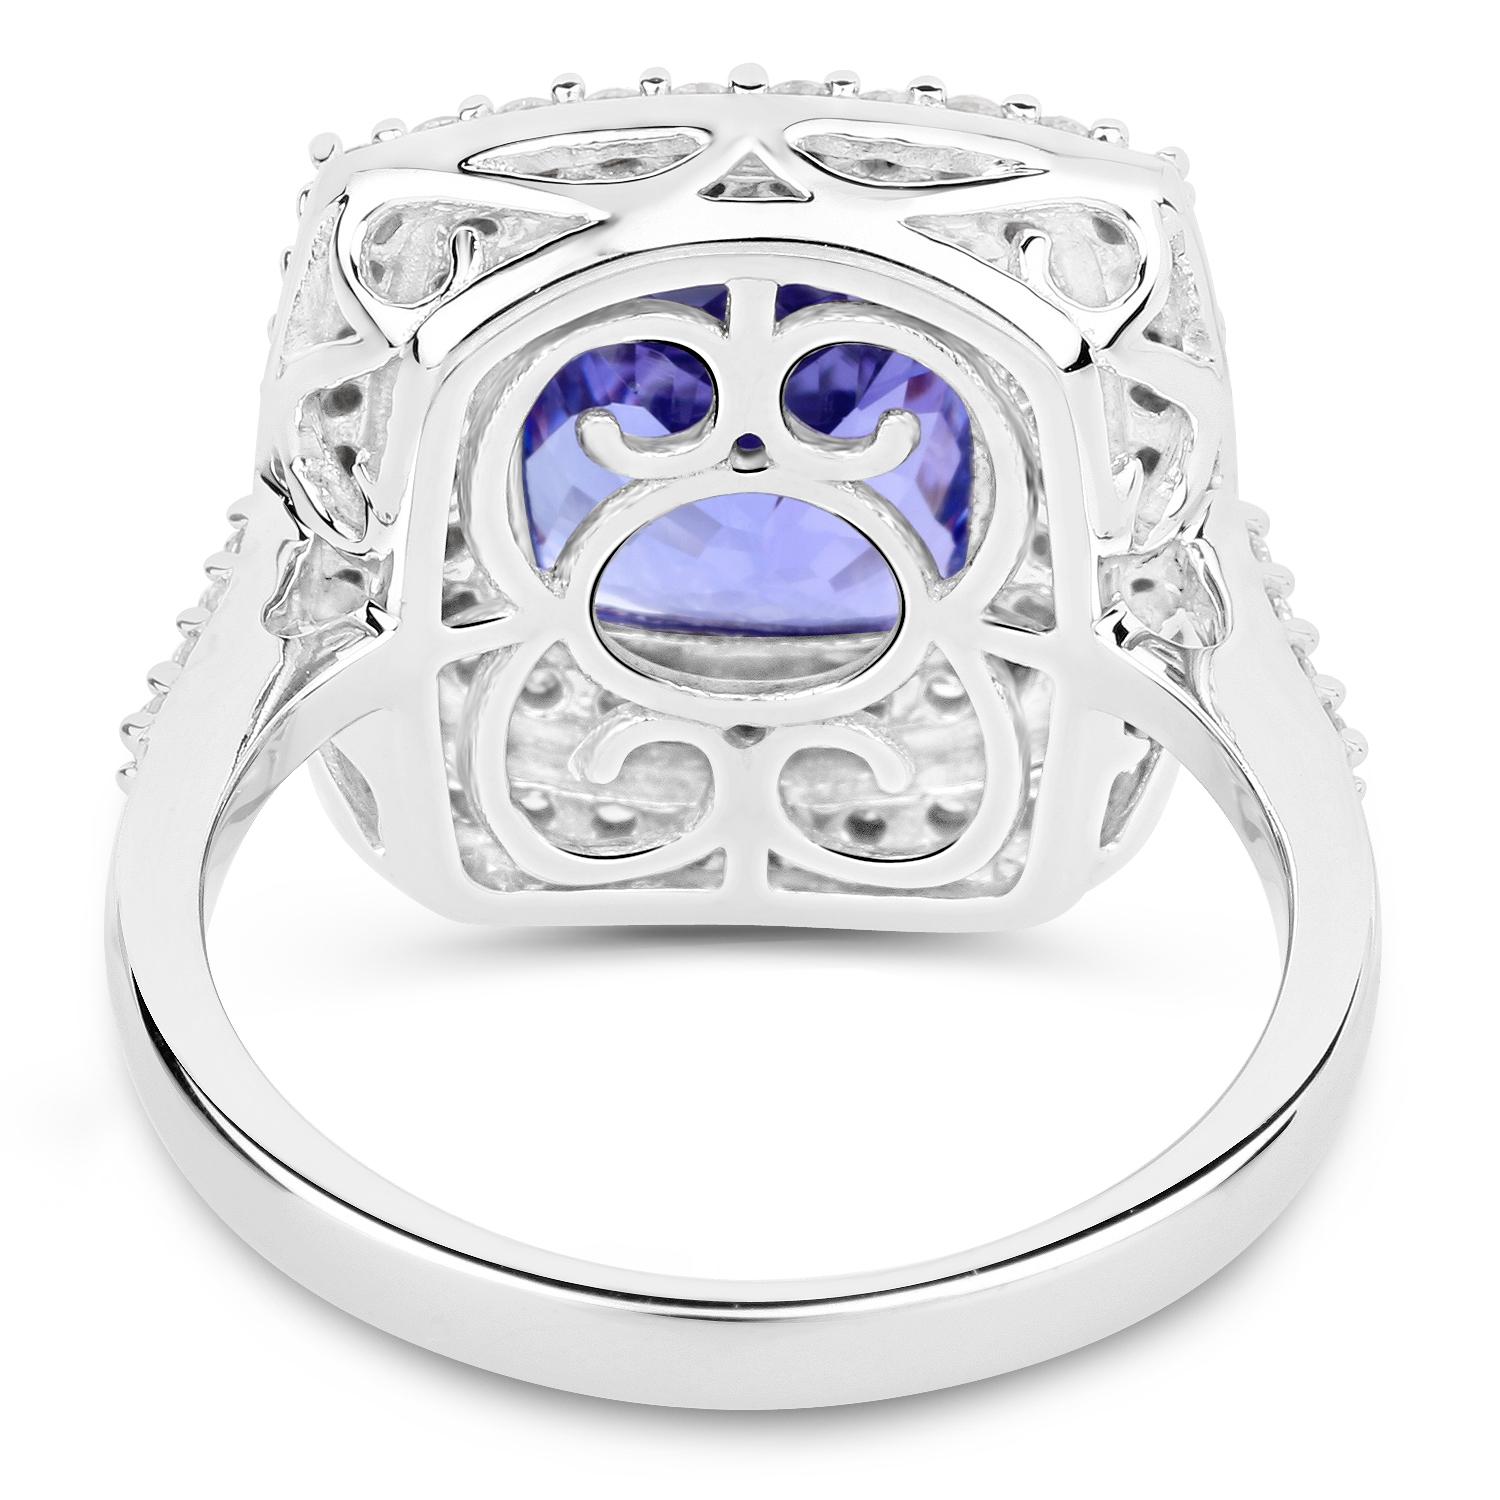 Contemporary 4.94 Carat Tanzanite and Diamond 14 Karat White Gold Cocktail Ring For Sale